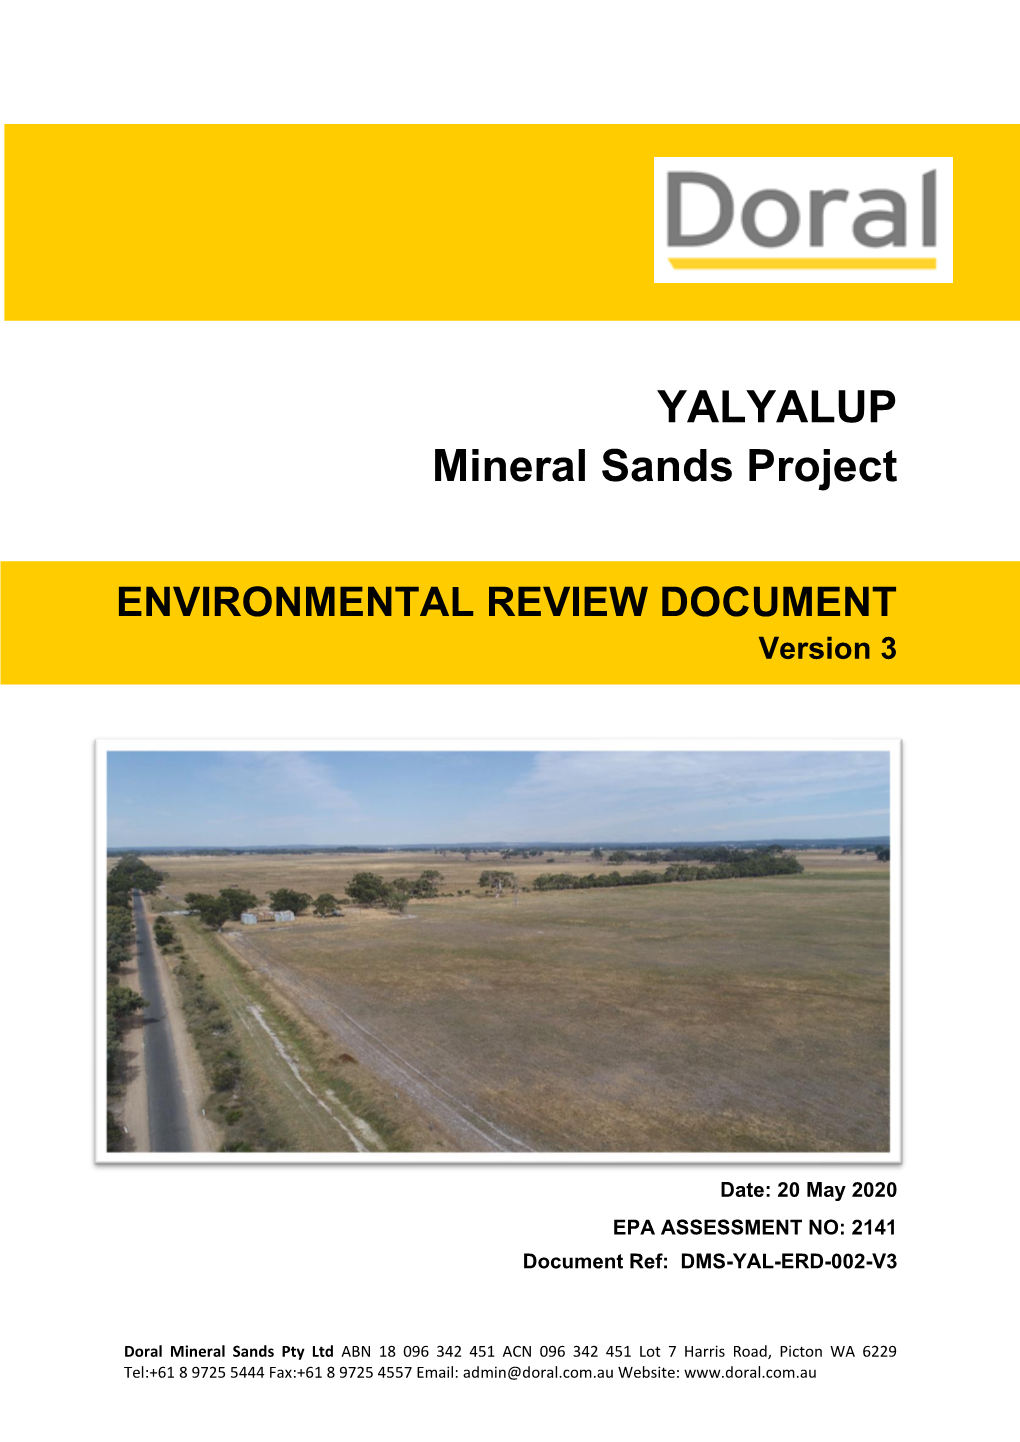 ENVIRONMENTAL REVIEW DOCUMENT Version 3